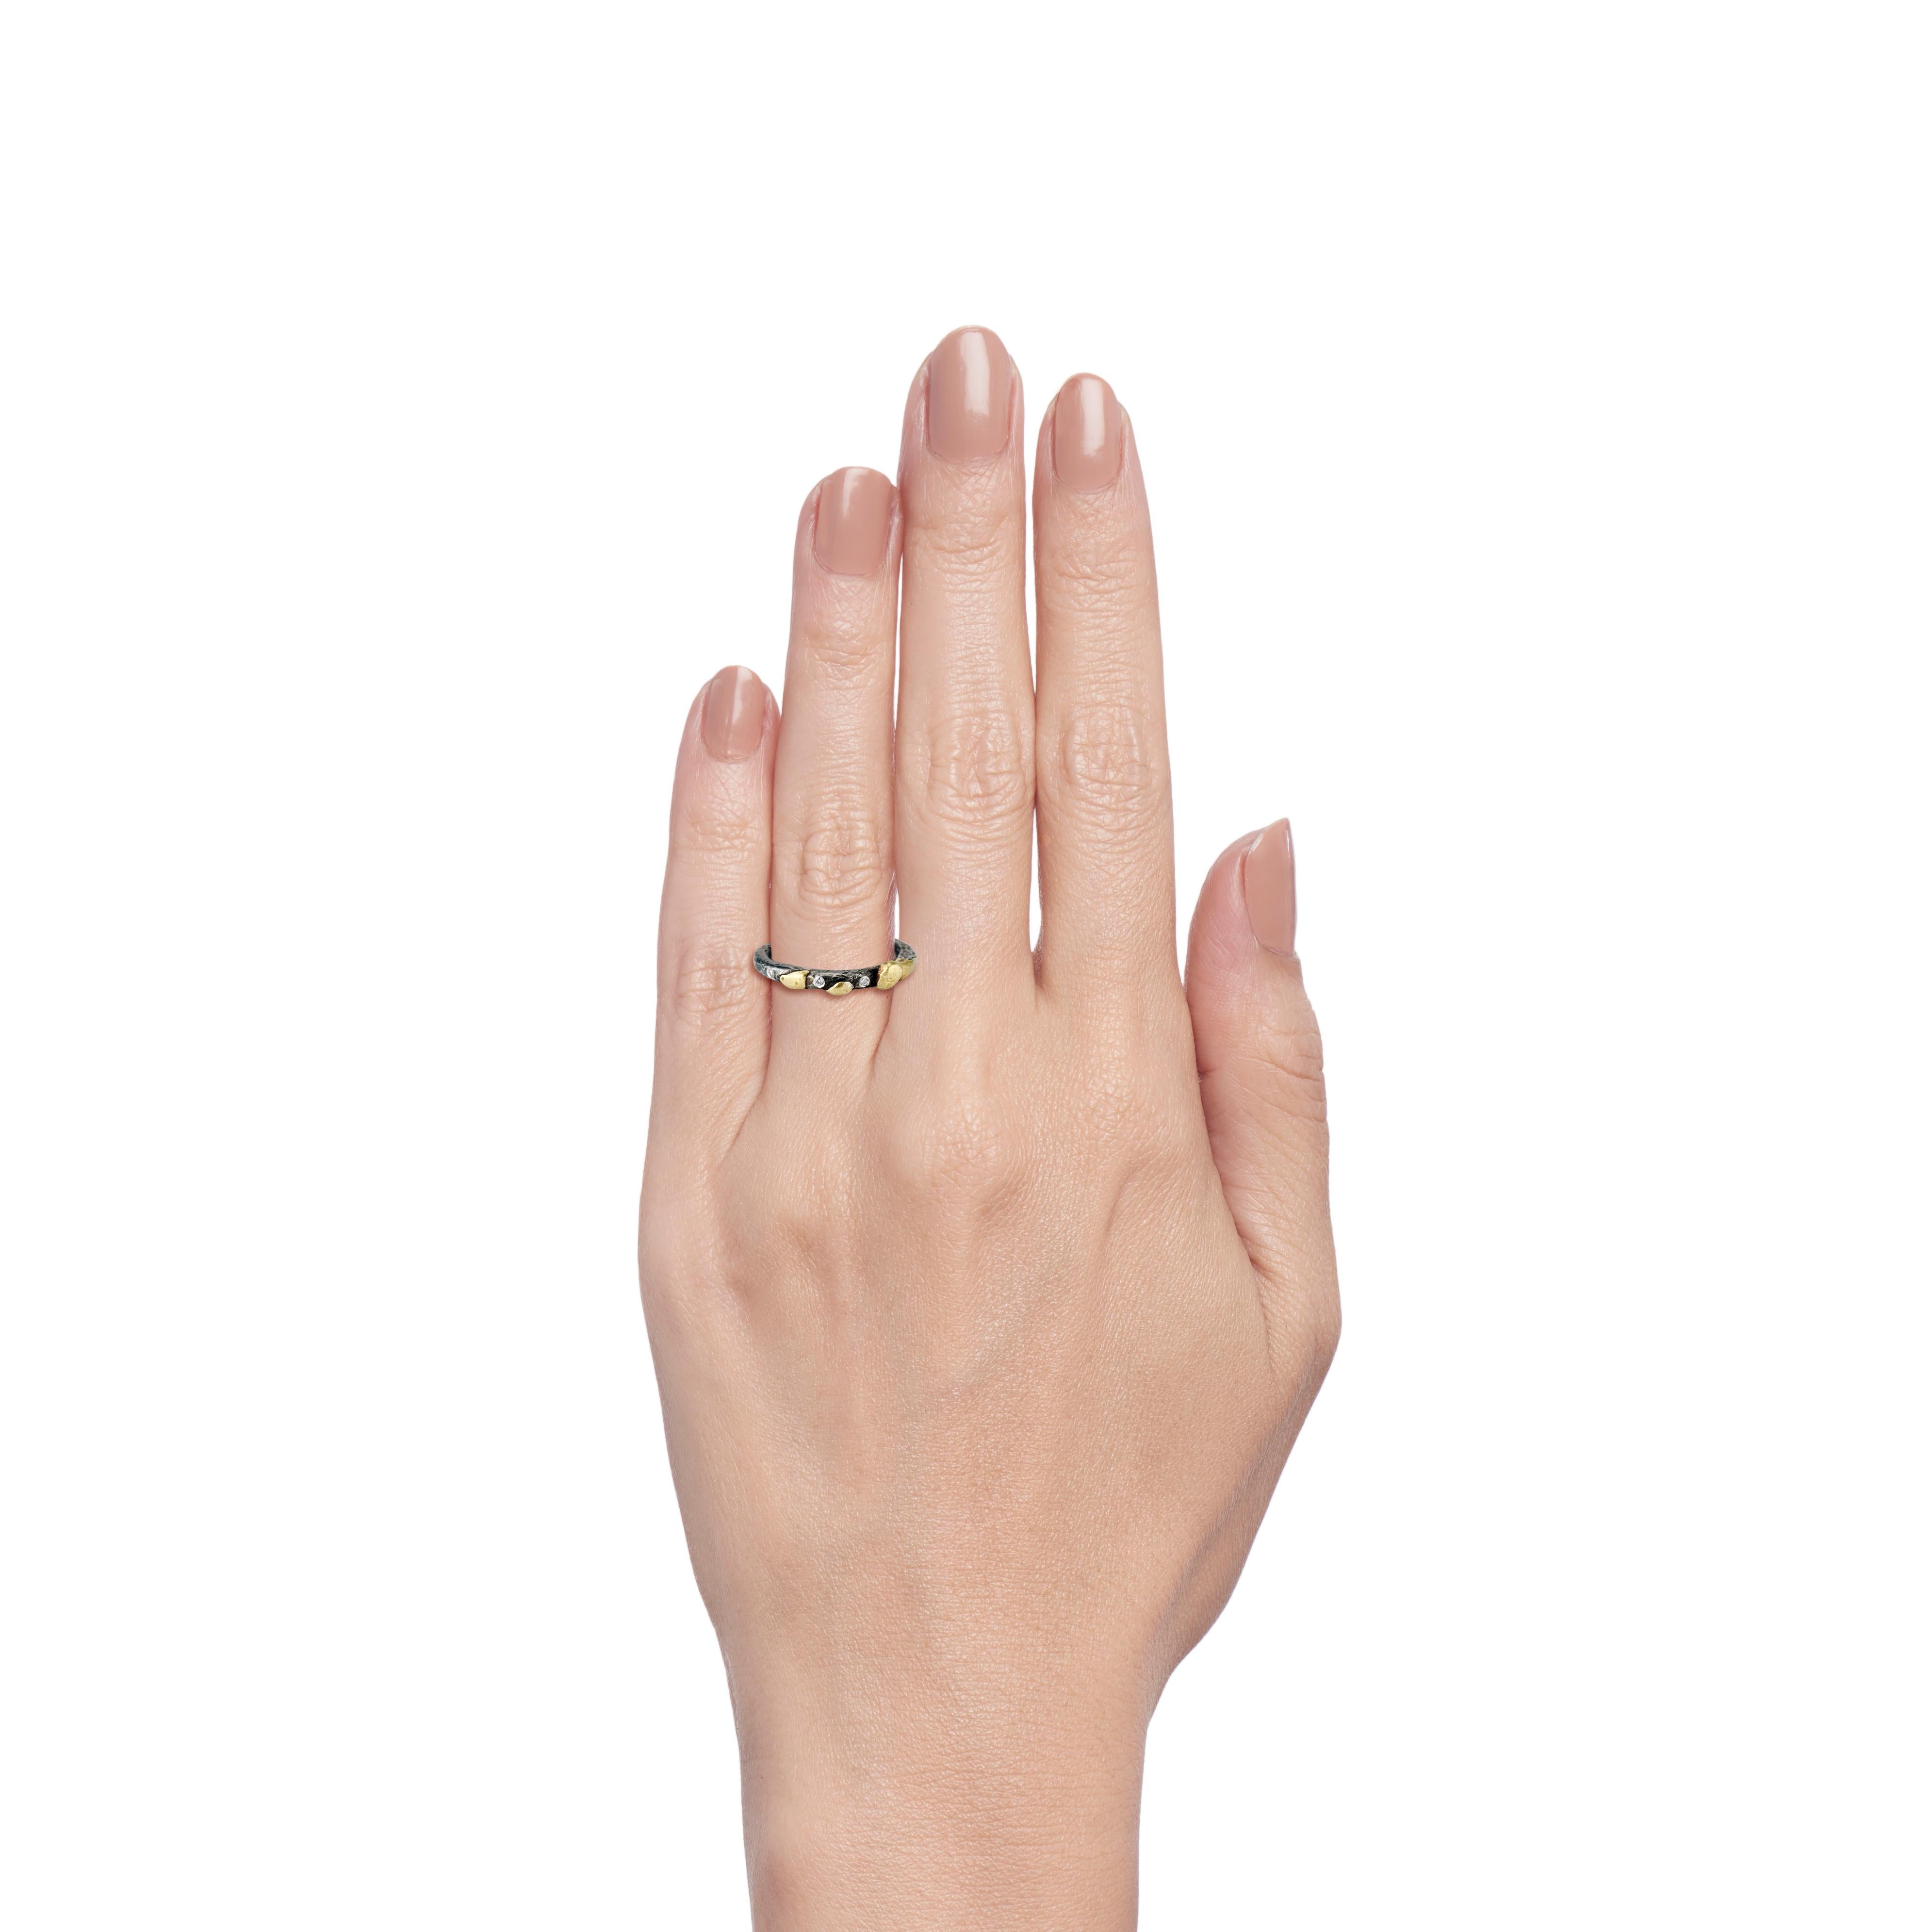 This charming skinny band ring starts with a 2mm band of Sterling Silver (size 5 1/2).  Next, shards of 22 karat yellow gold and three white round melee diamonds add texture, light and brightness.  The final part of the process is oxidizing the